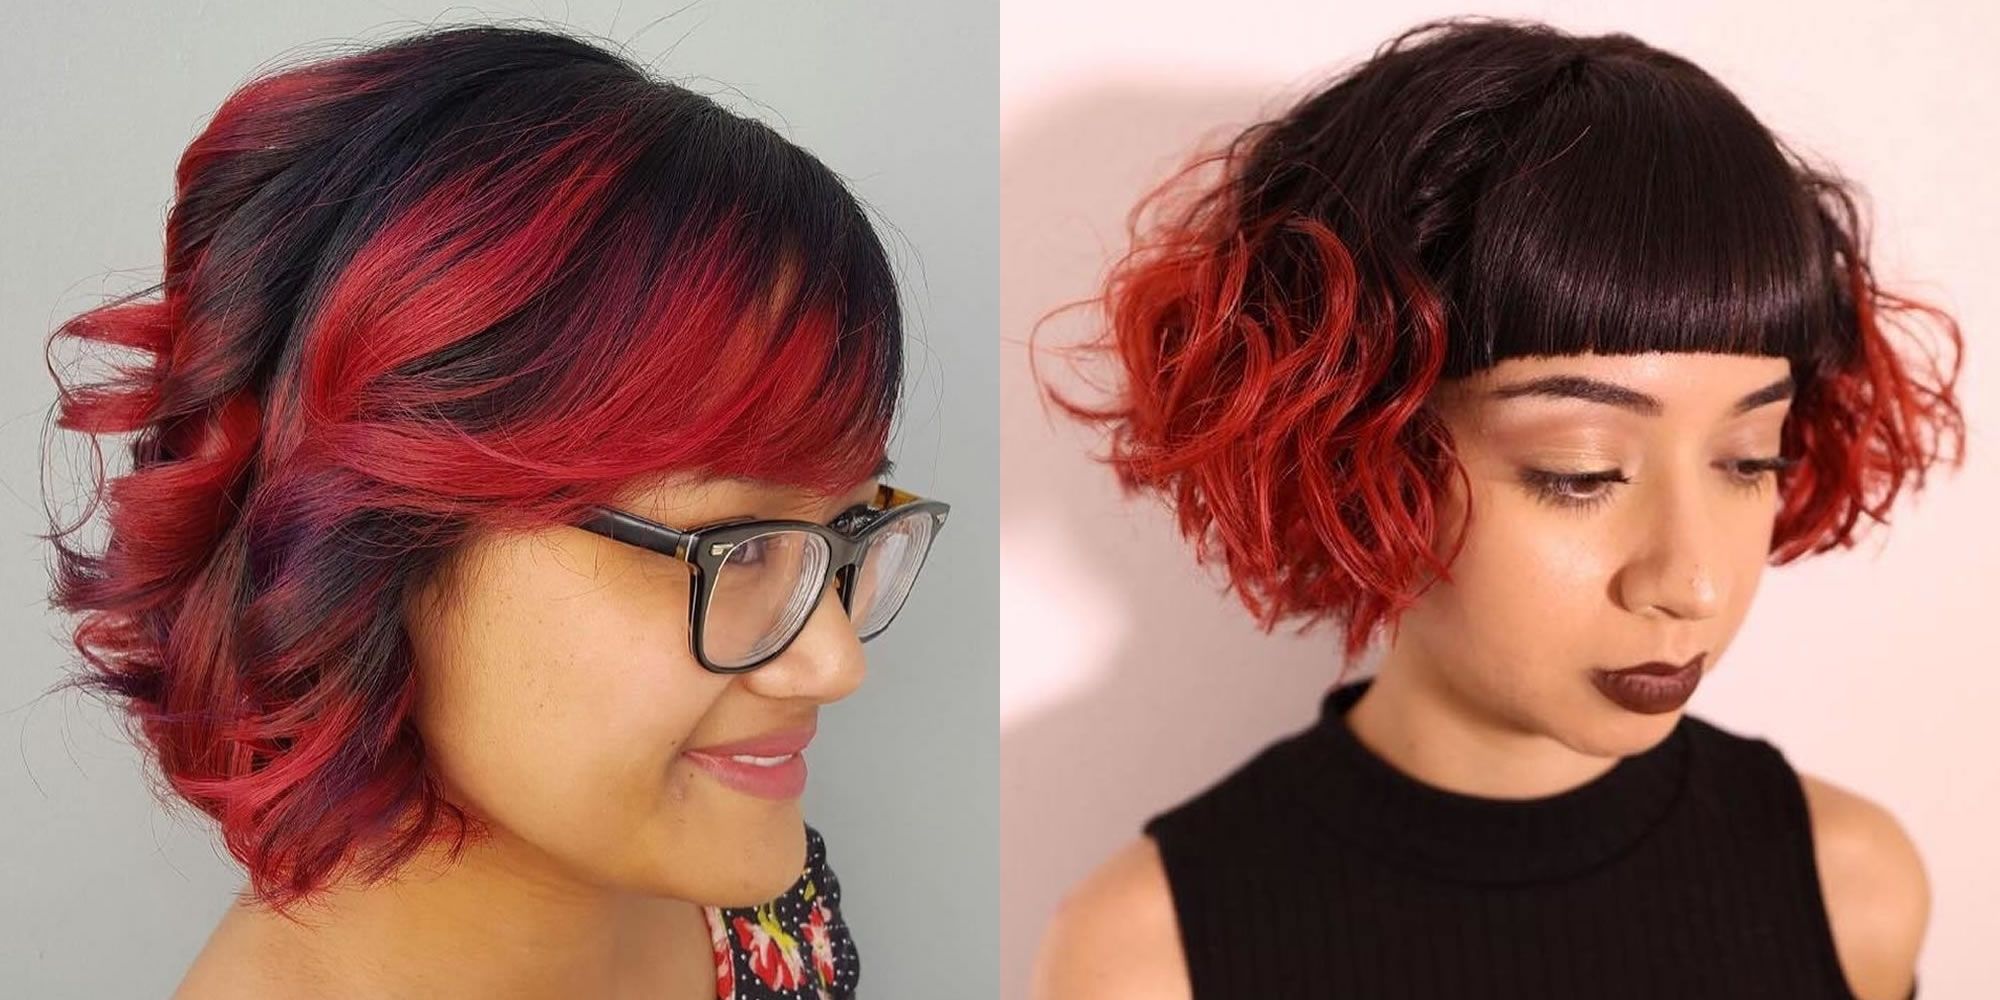 30 Ravishing Short Bob Hair Cuts With Bangs & New Hair Colors – Page Pertaining To Most Up To Date Ravishing Red Pixie Haircuts (View 6 of 15)